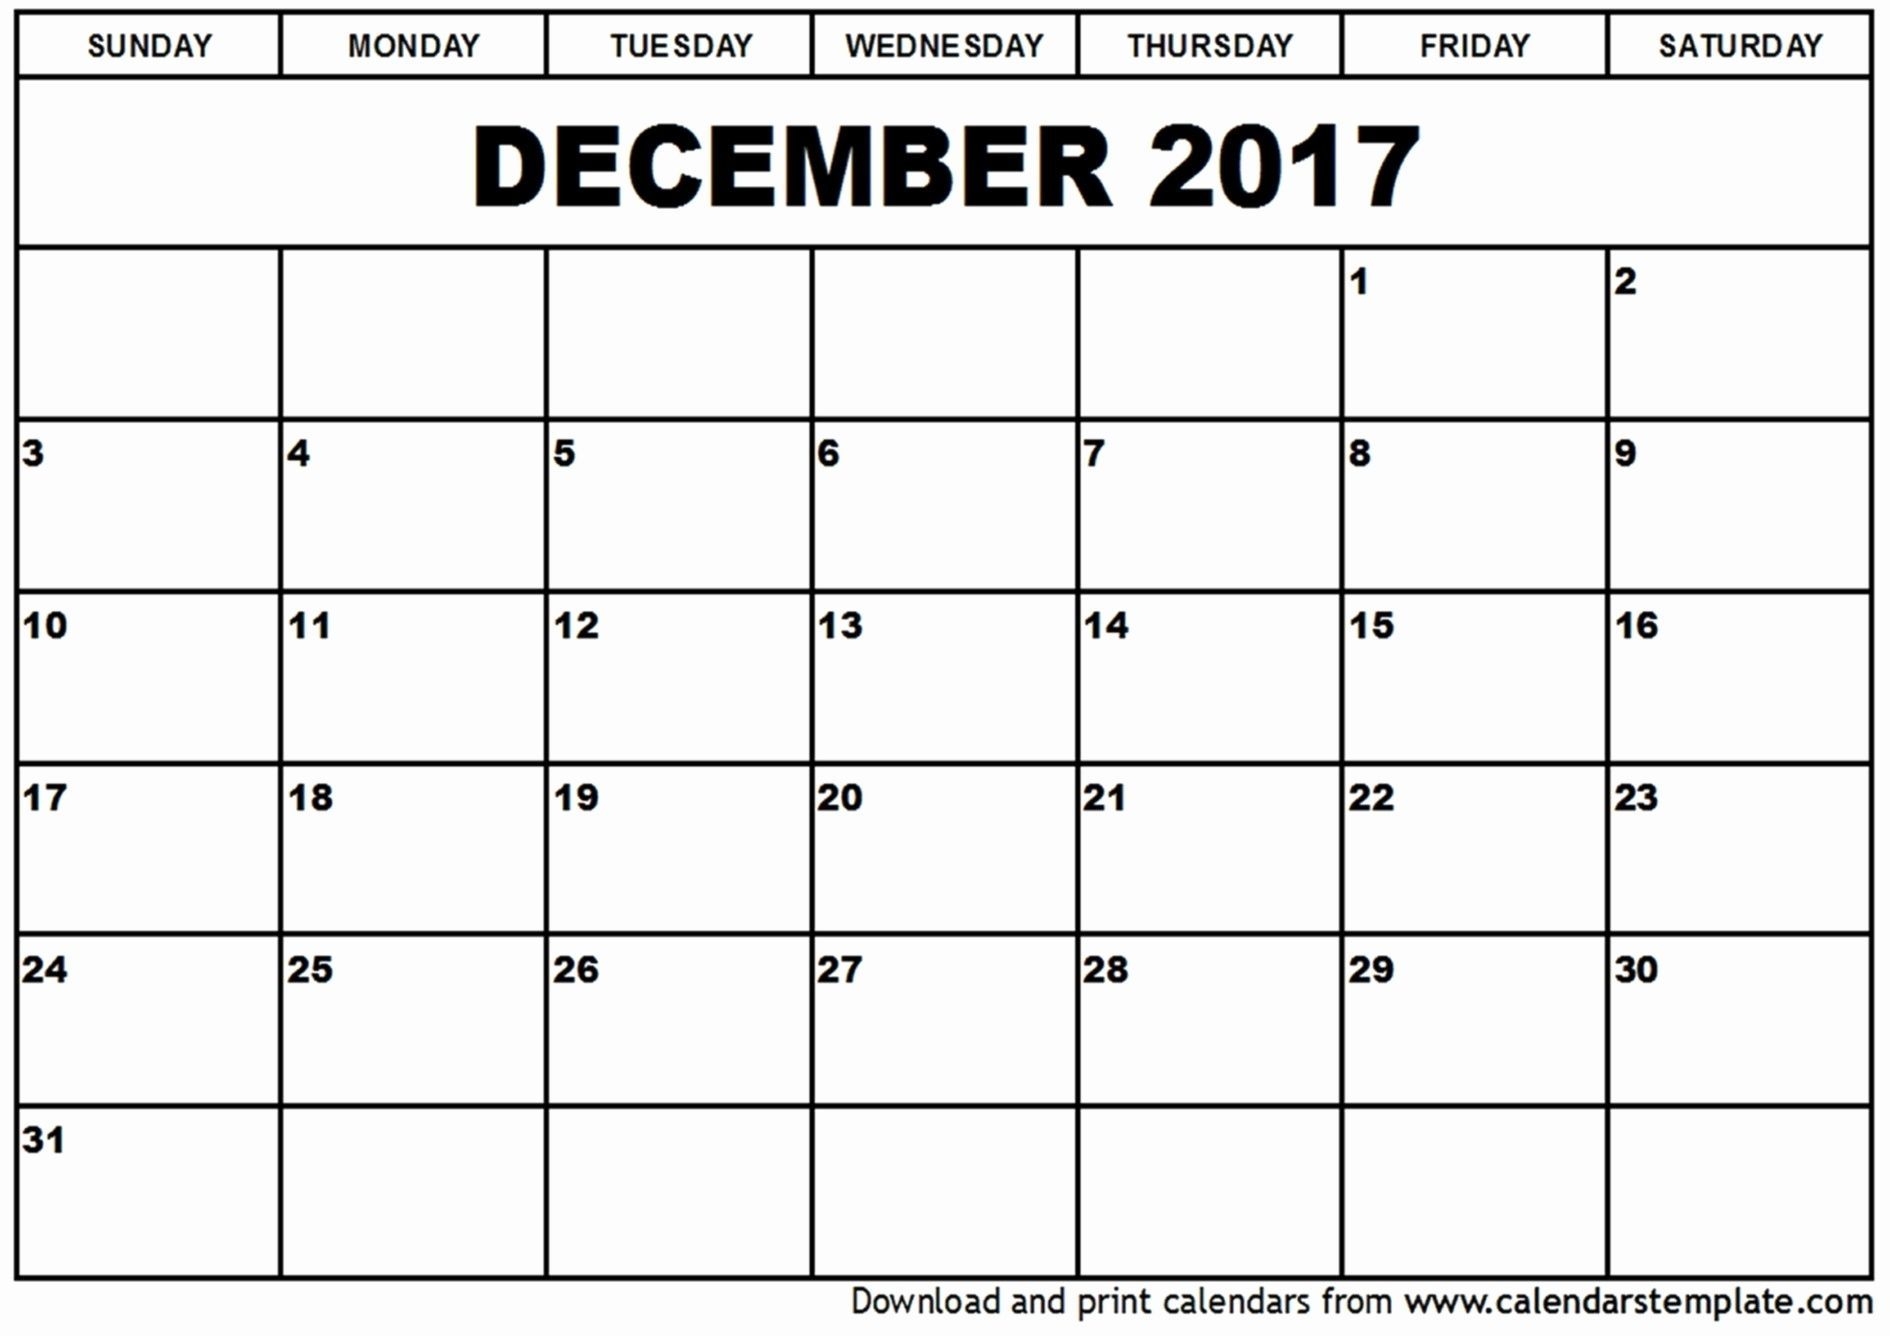 Printable Calendar I Can Type On In 2020 | Monthly Calendar